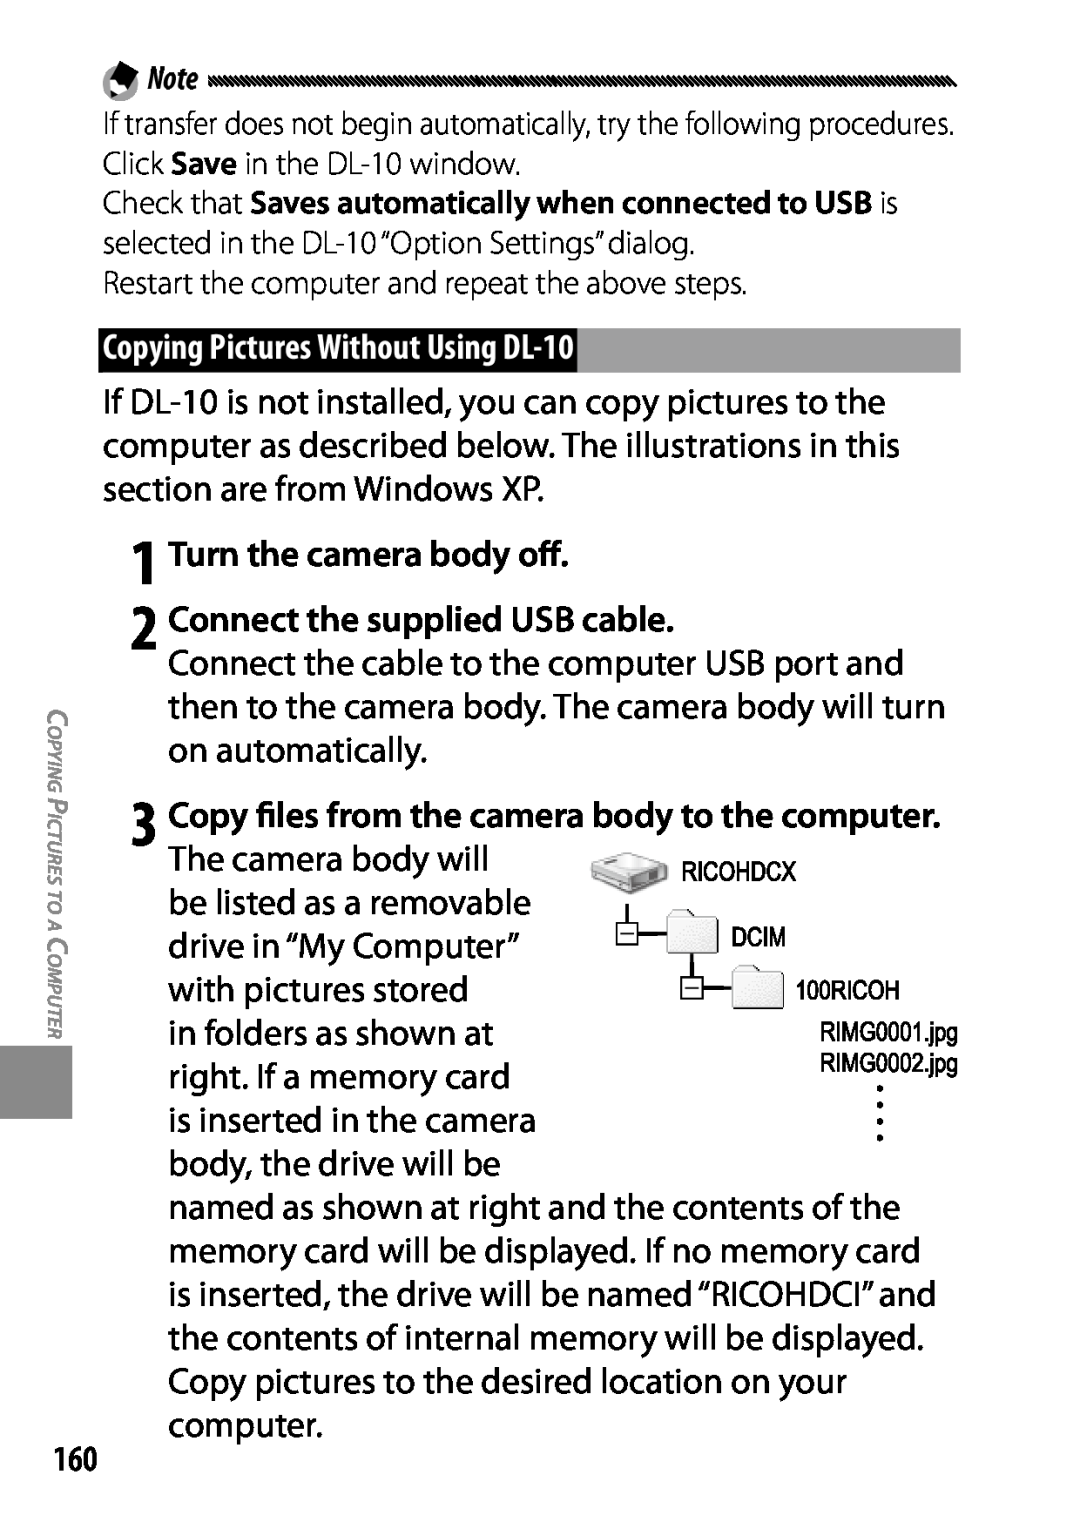 Ricoh 170543, GXR, 170553 Copying Pictures Without Using DL-10, 1 Turn the camera body off 2 Connect the supplied USB cable 